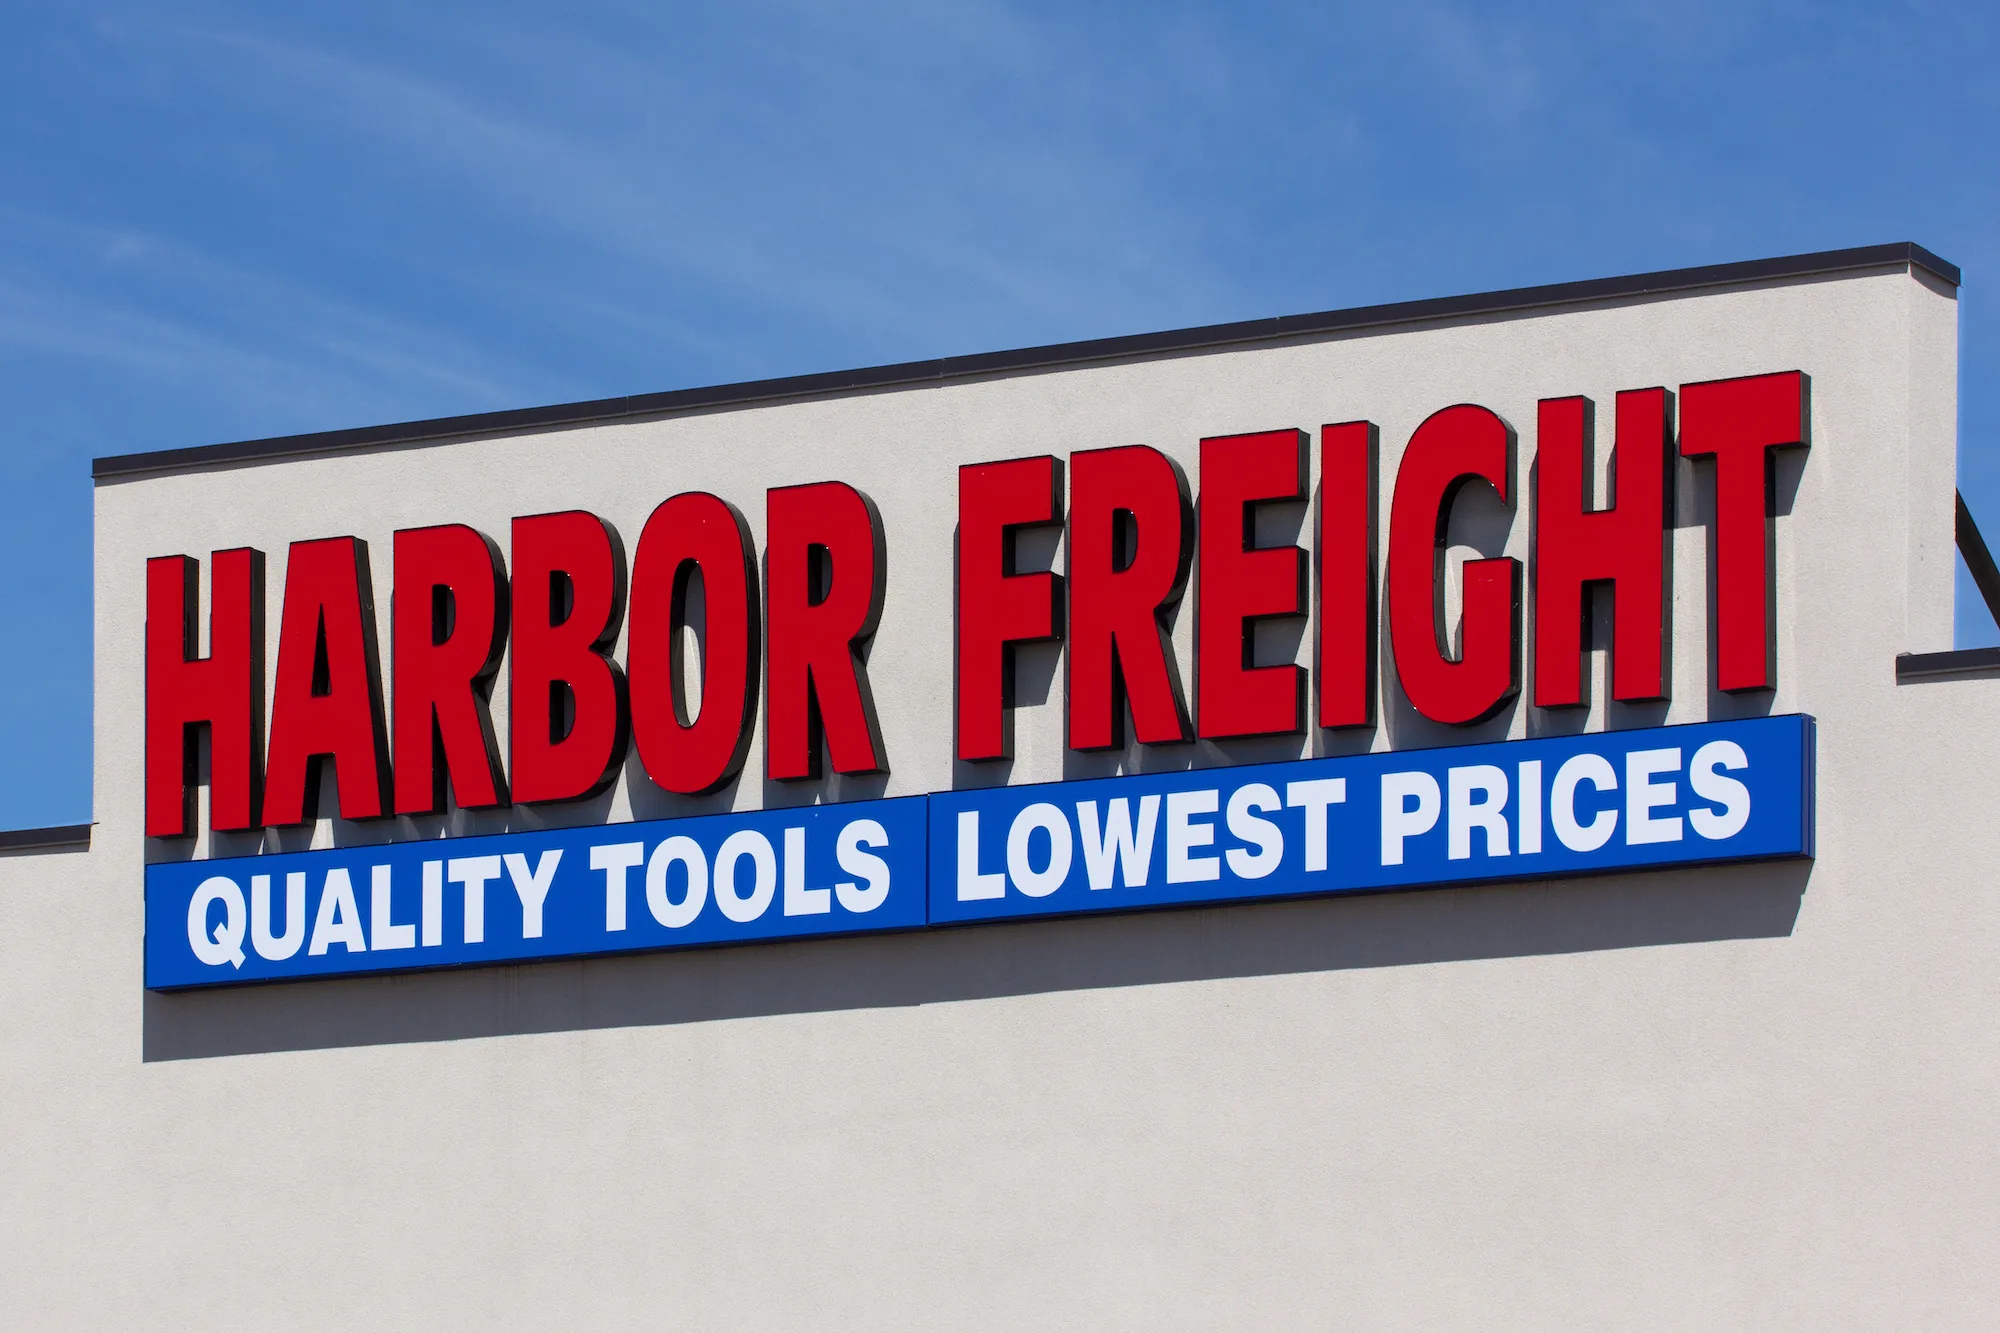 How to Maximize Your Savings at Harbor Freight Tools with Online Coupon Codes